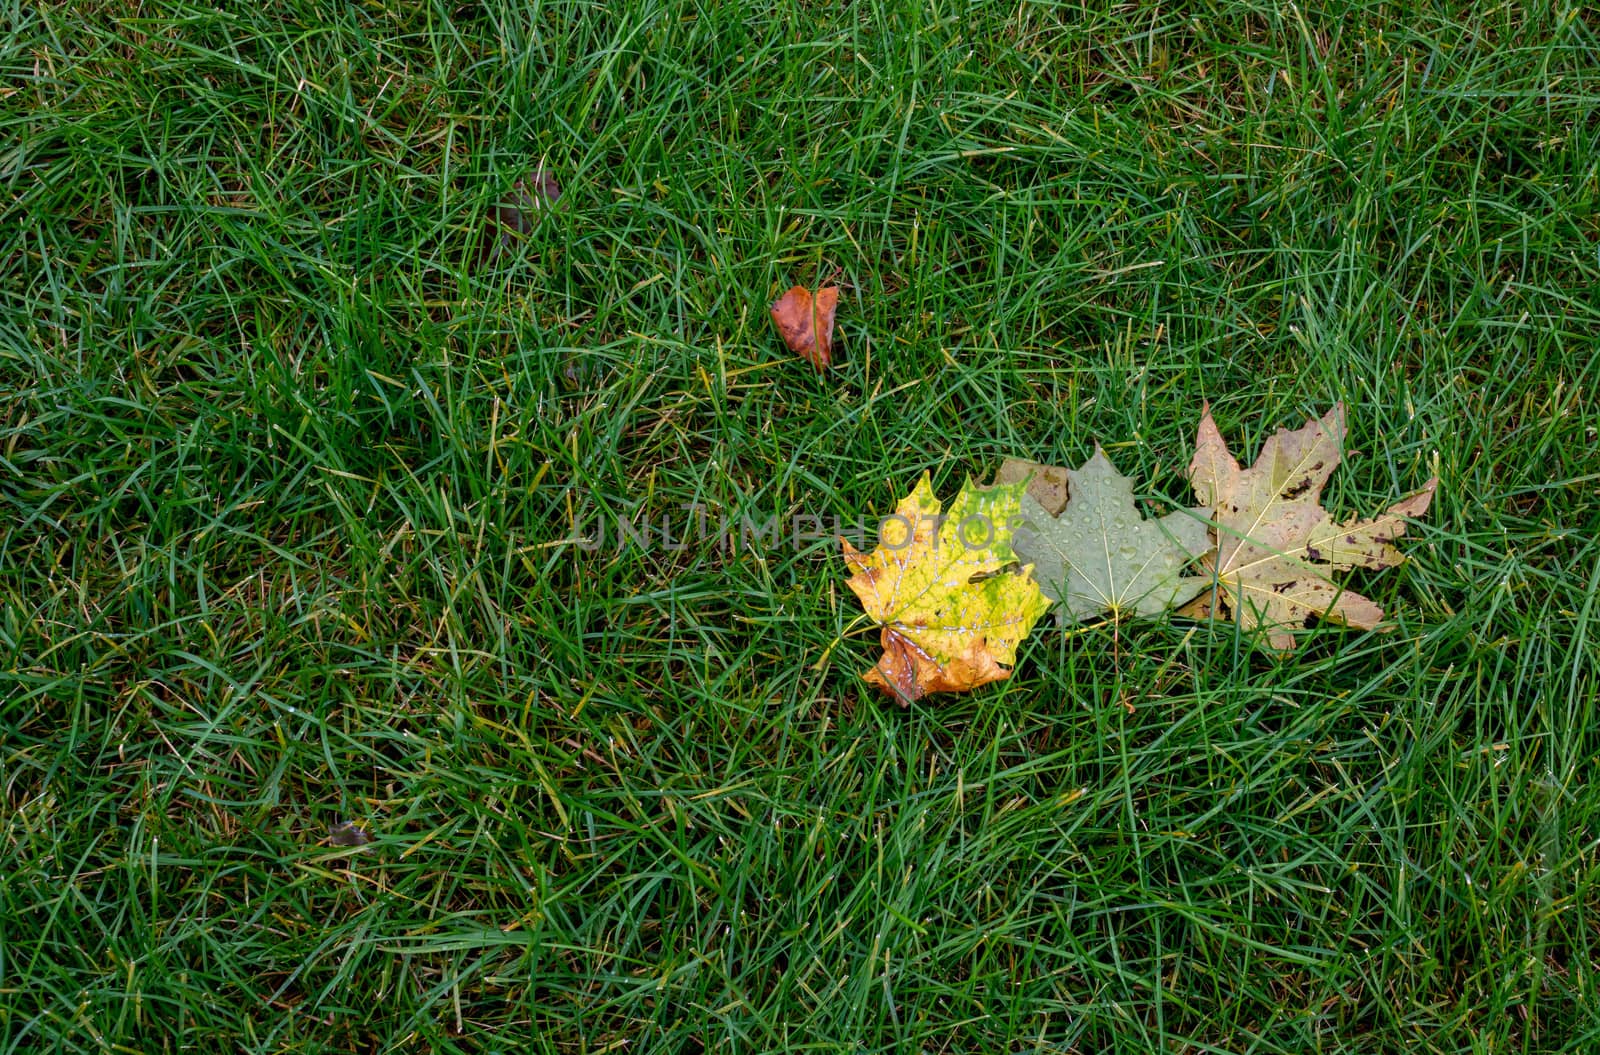 Fallen maple leaves on grass field. Autumn concept of fallen leaves on a green grass lawn. Dry leaves contrast with green grass by lapushka62